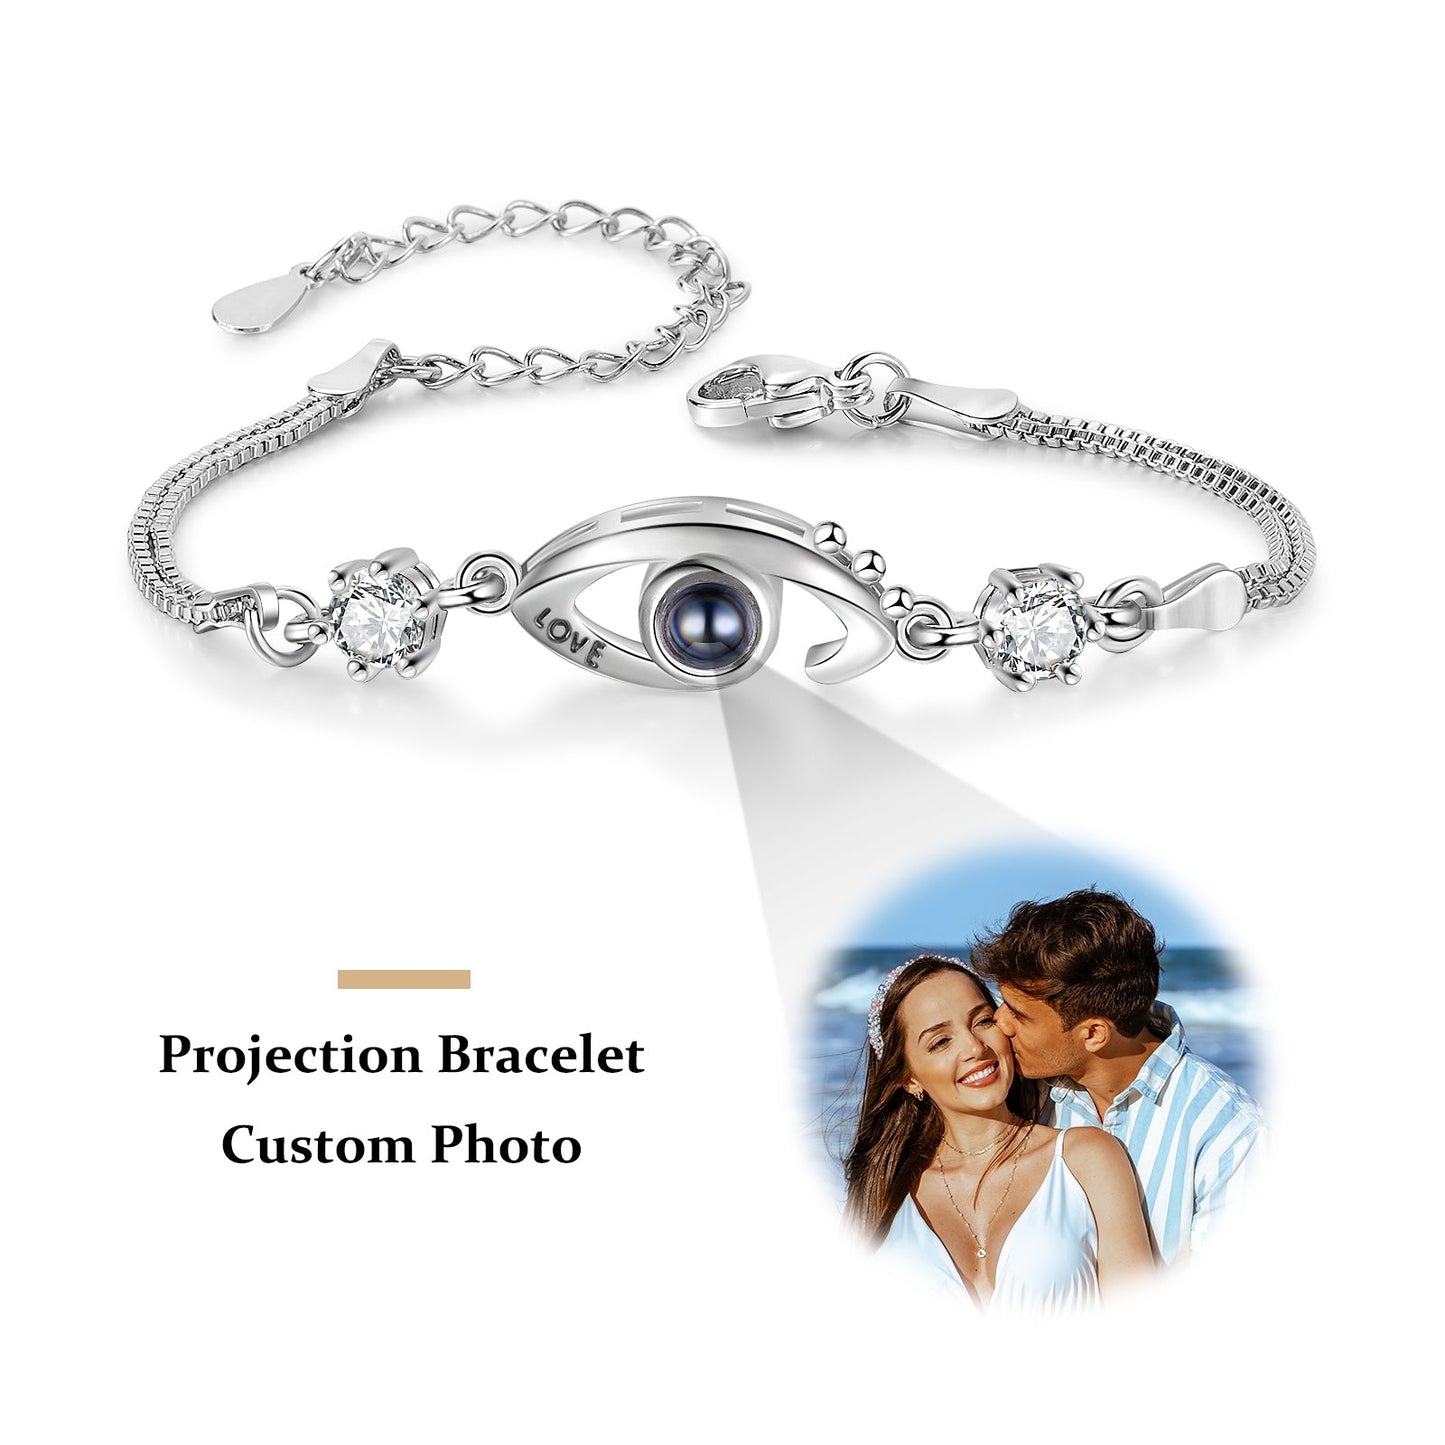 ThinkEngraved Projection necklace Color Photo / 316L Surgical Steel Custom Seeing Eye Photo Projection Bracelet - Color or Black and White